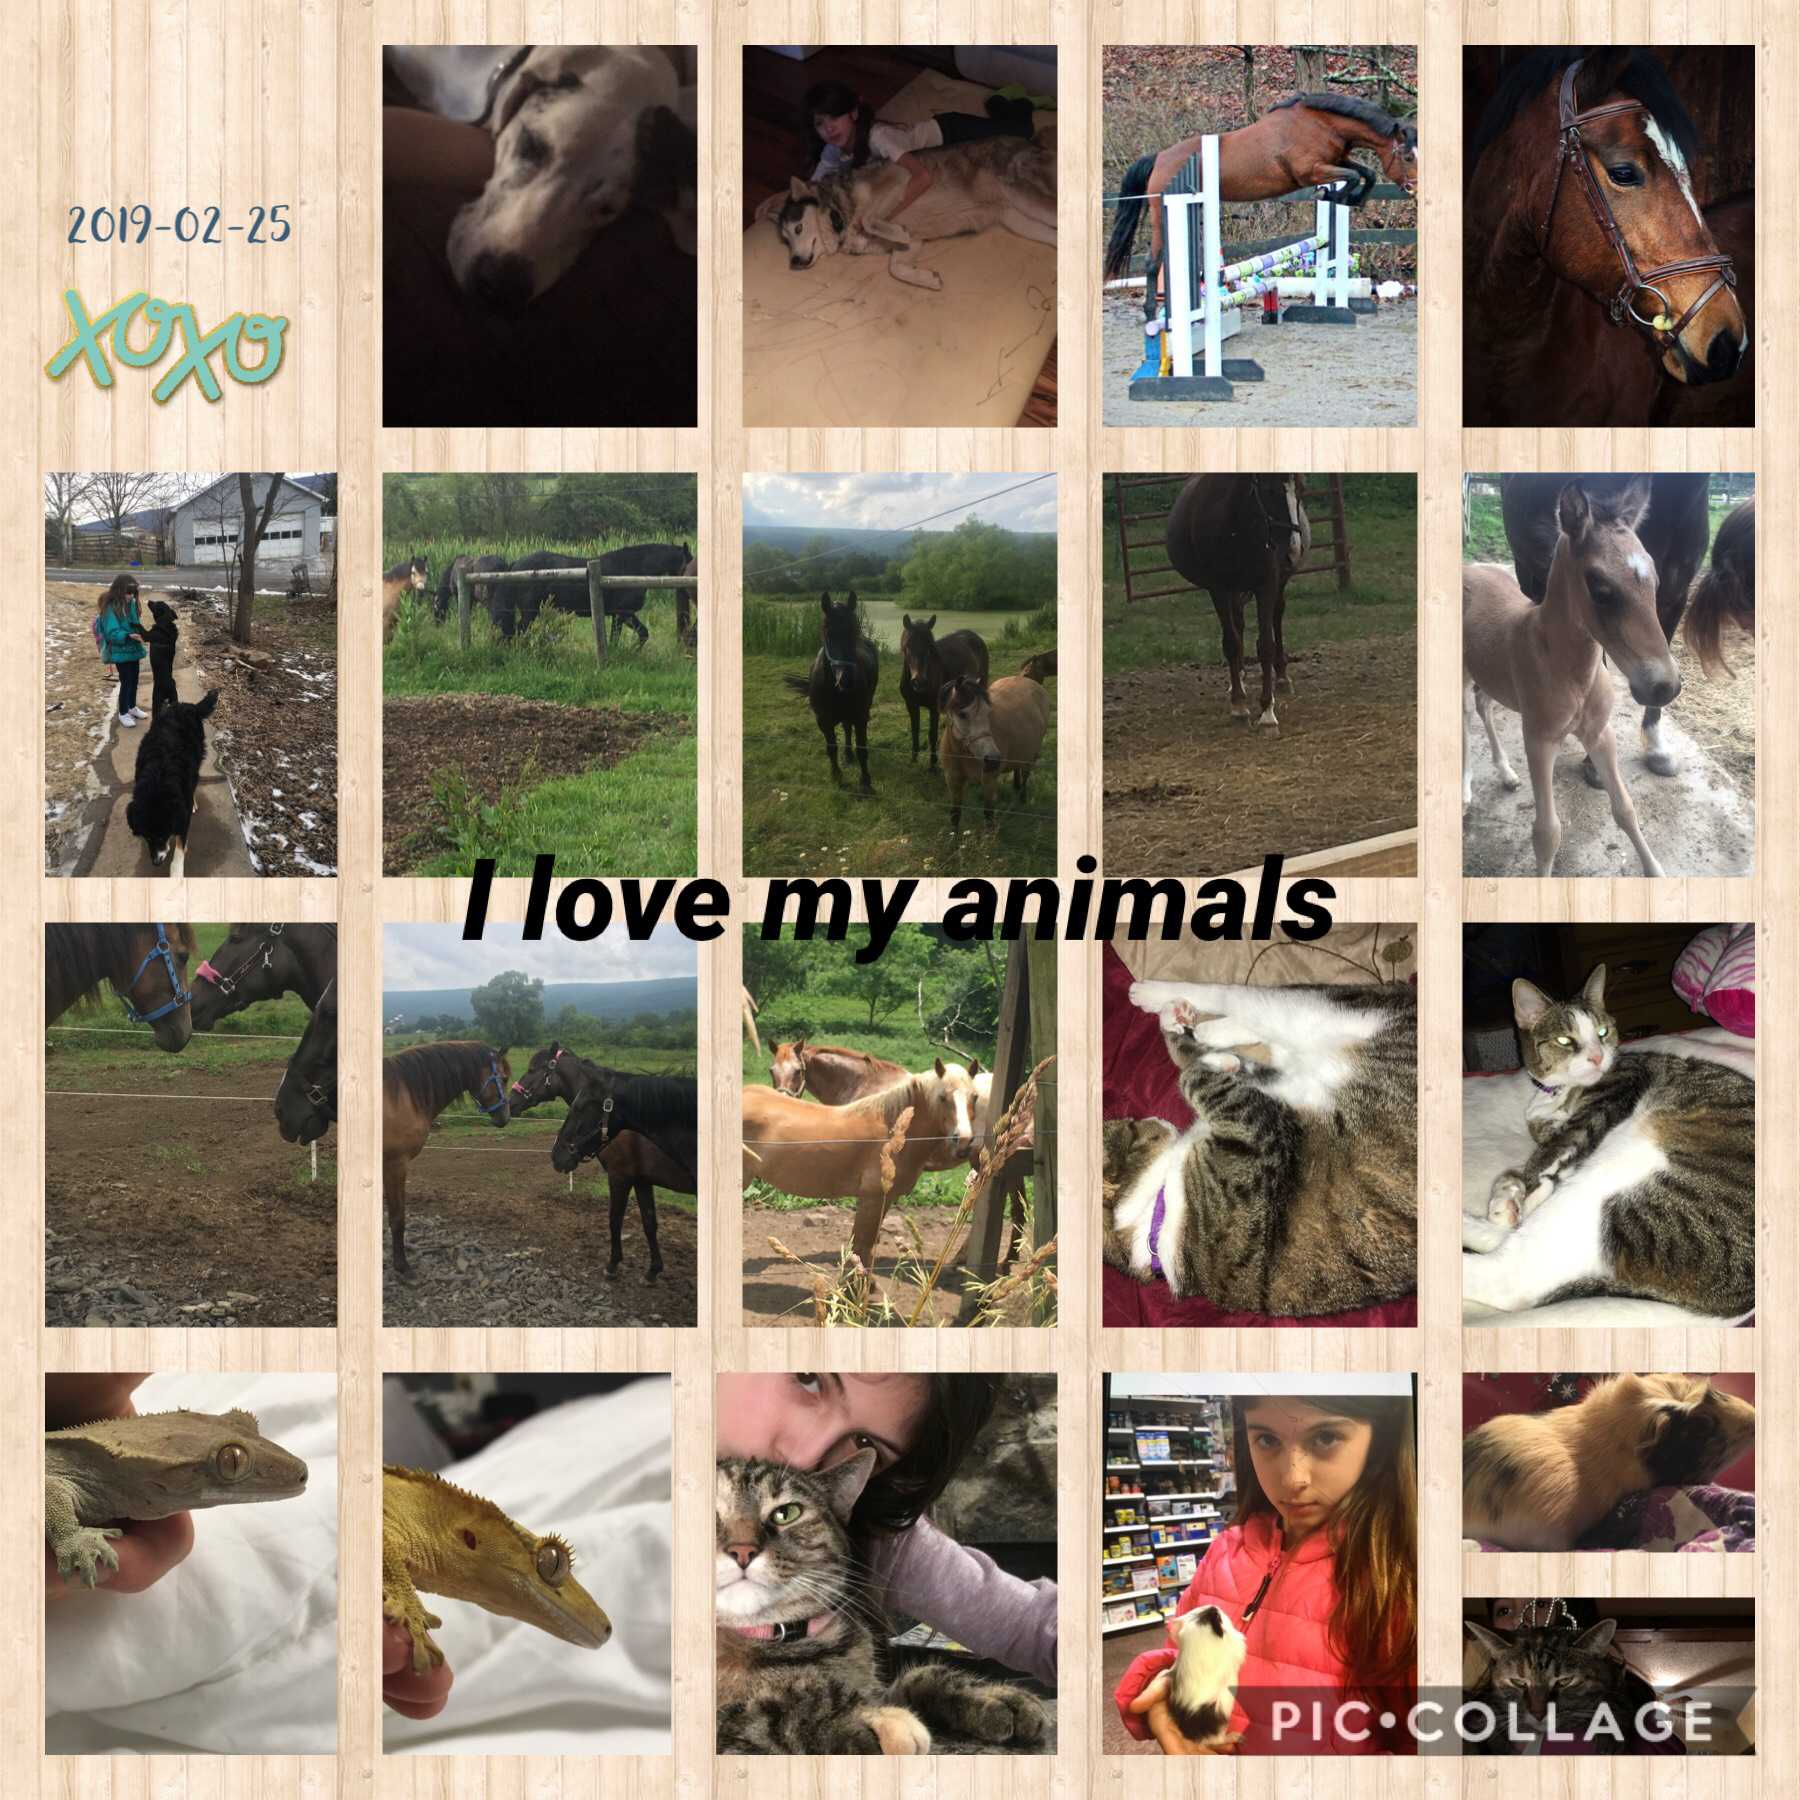 My animals are amazing and awesome and lovable